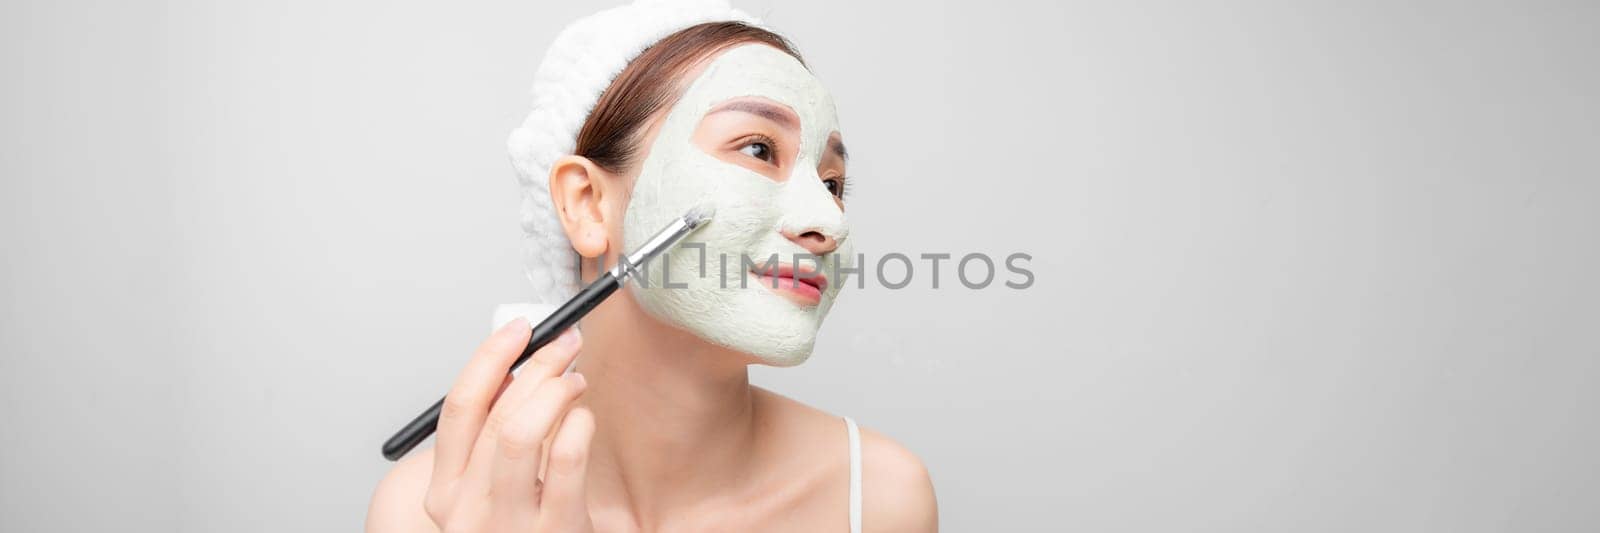 happy woman with a towel on her head apply a cleansing mask on her face by makidotvn